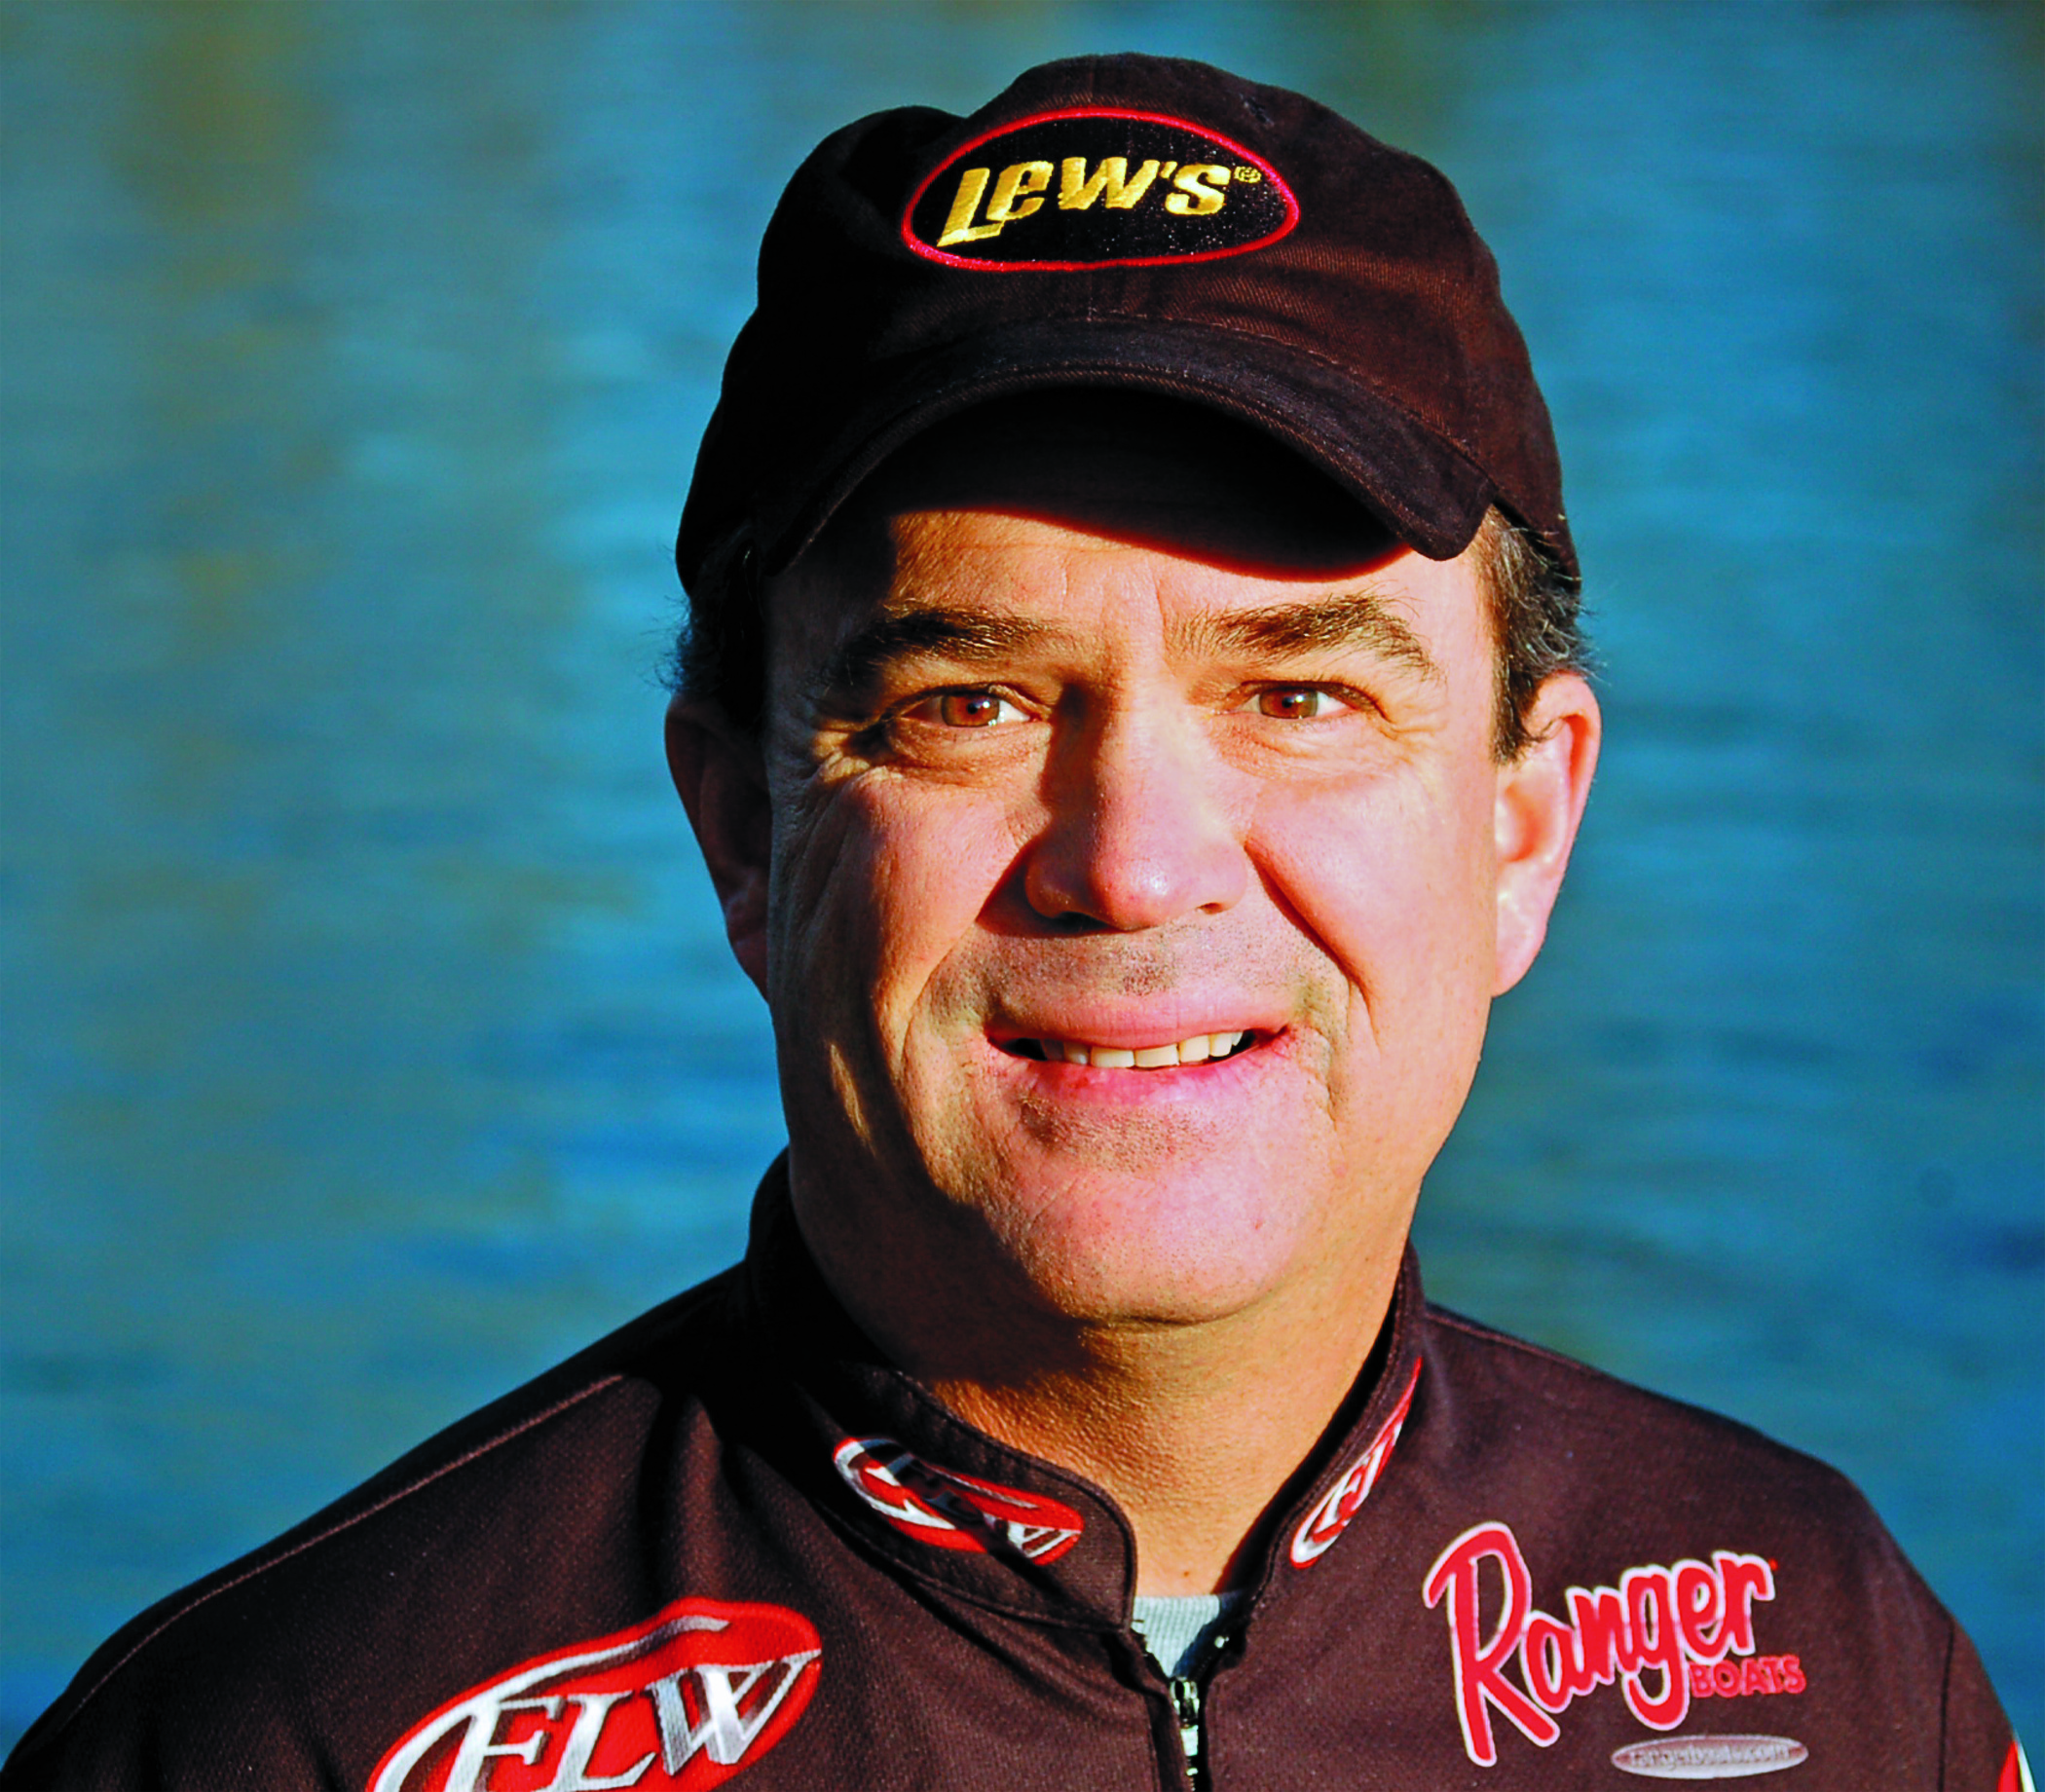 Team Lew's Anglers Ready for Fishing Fans at Bassmaster Classic